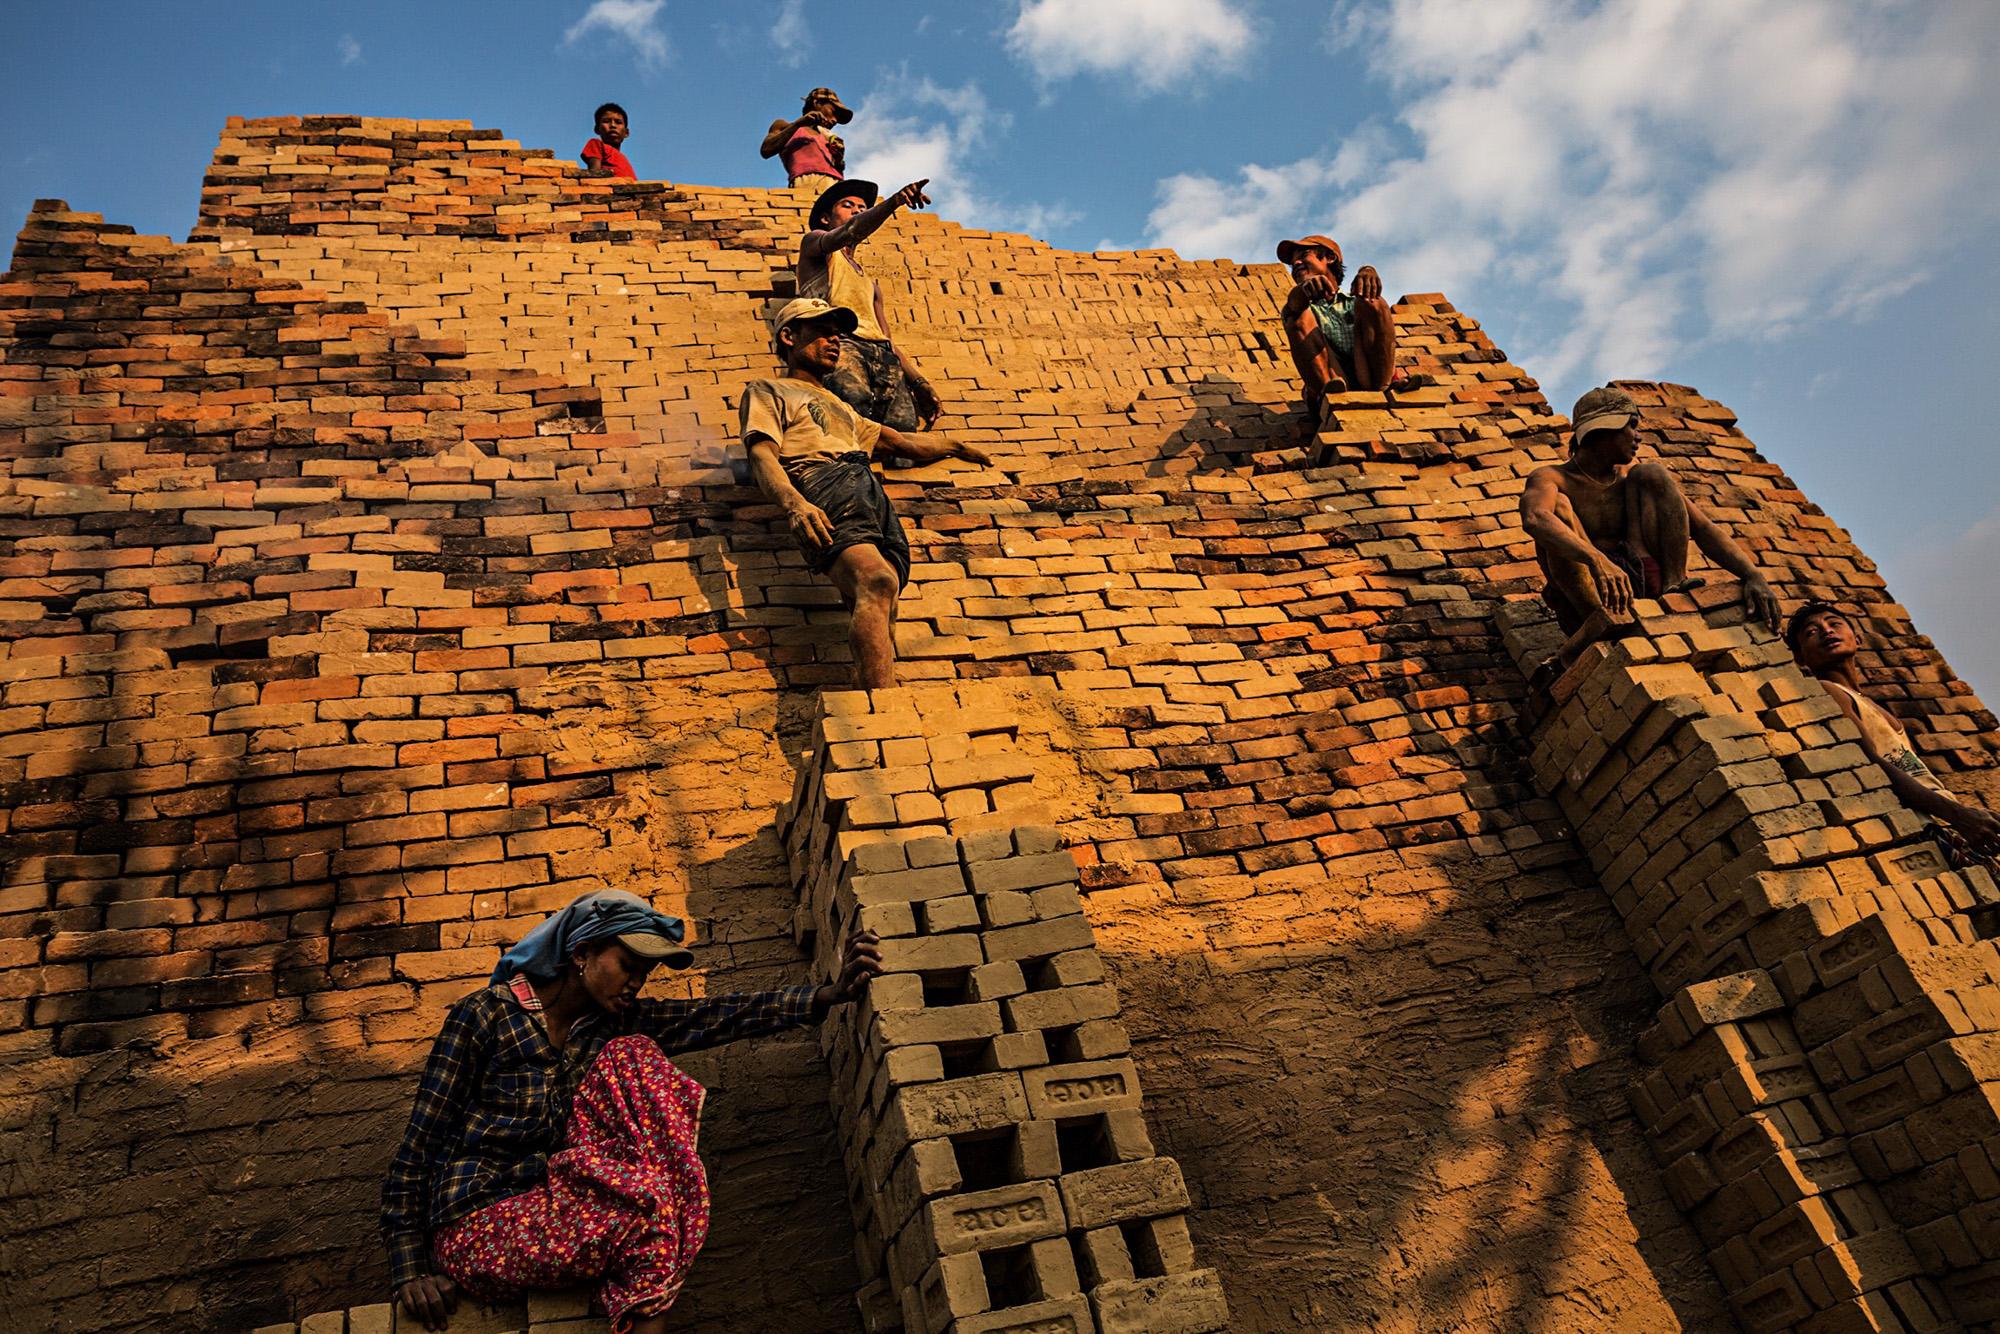  Workers stand on the face of a brick kiln in order to move bricks from the bottom to the to the top of the kiln, on the outskirts of Yangon,...